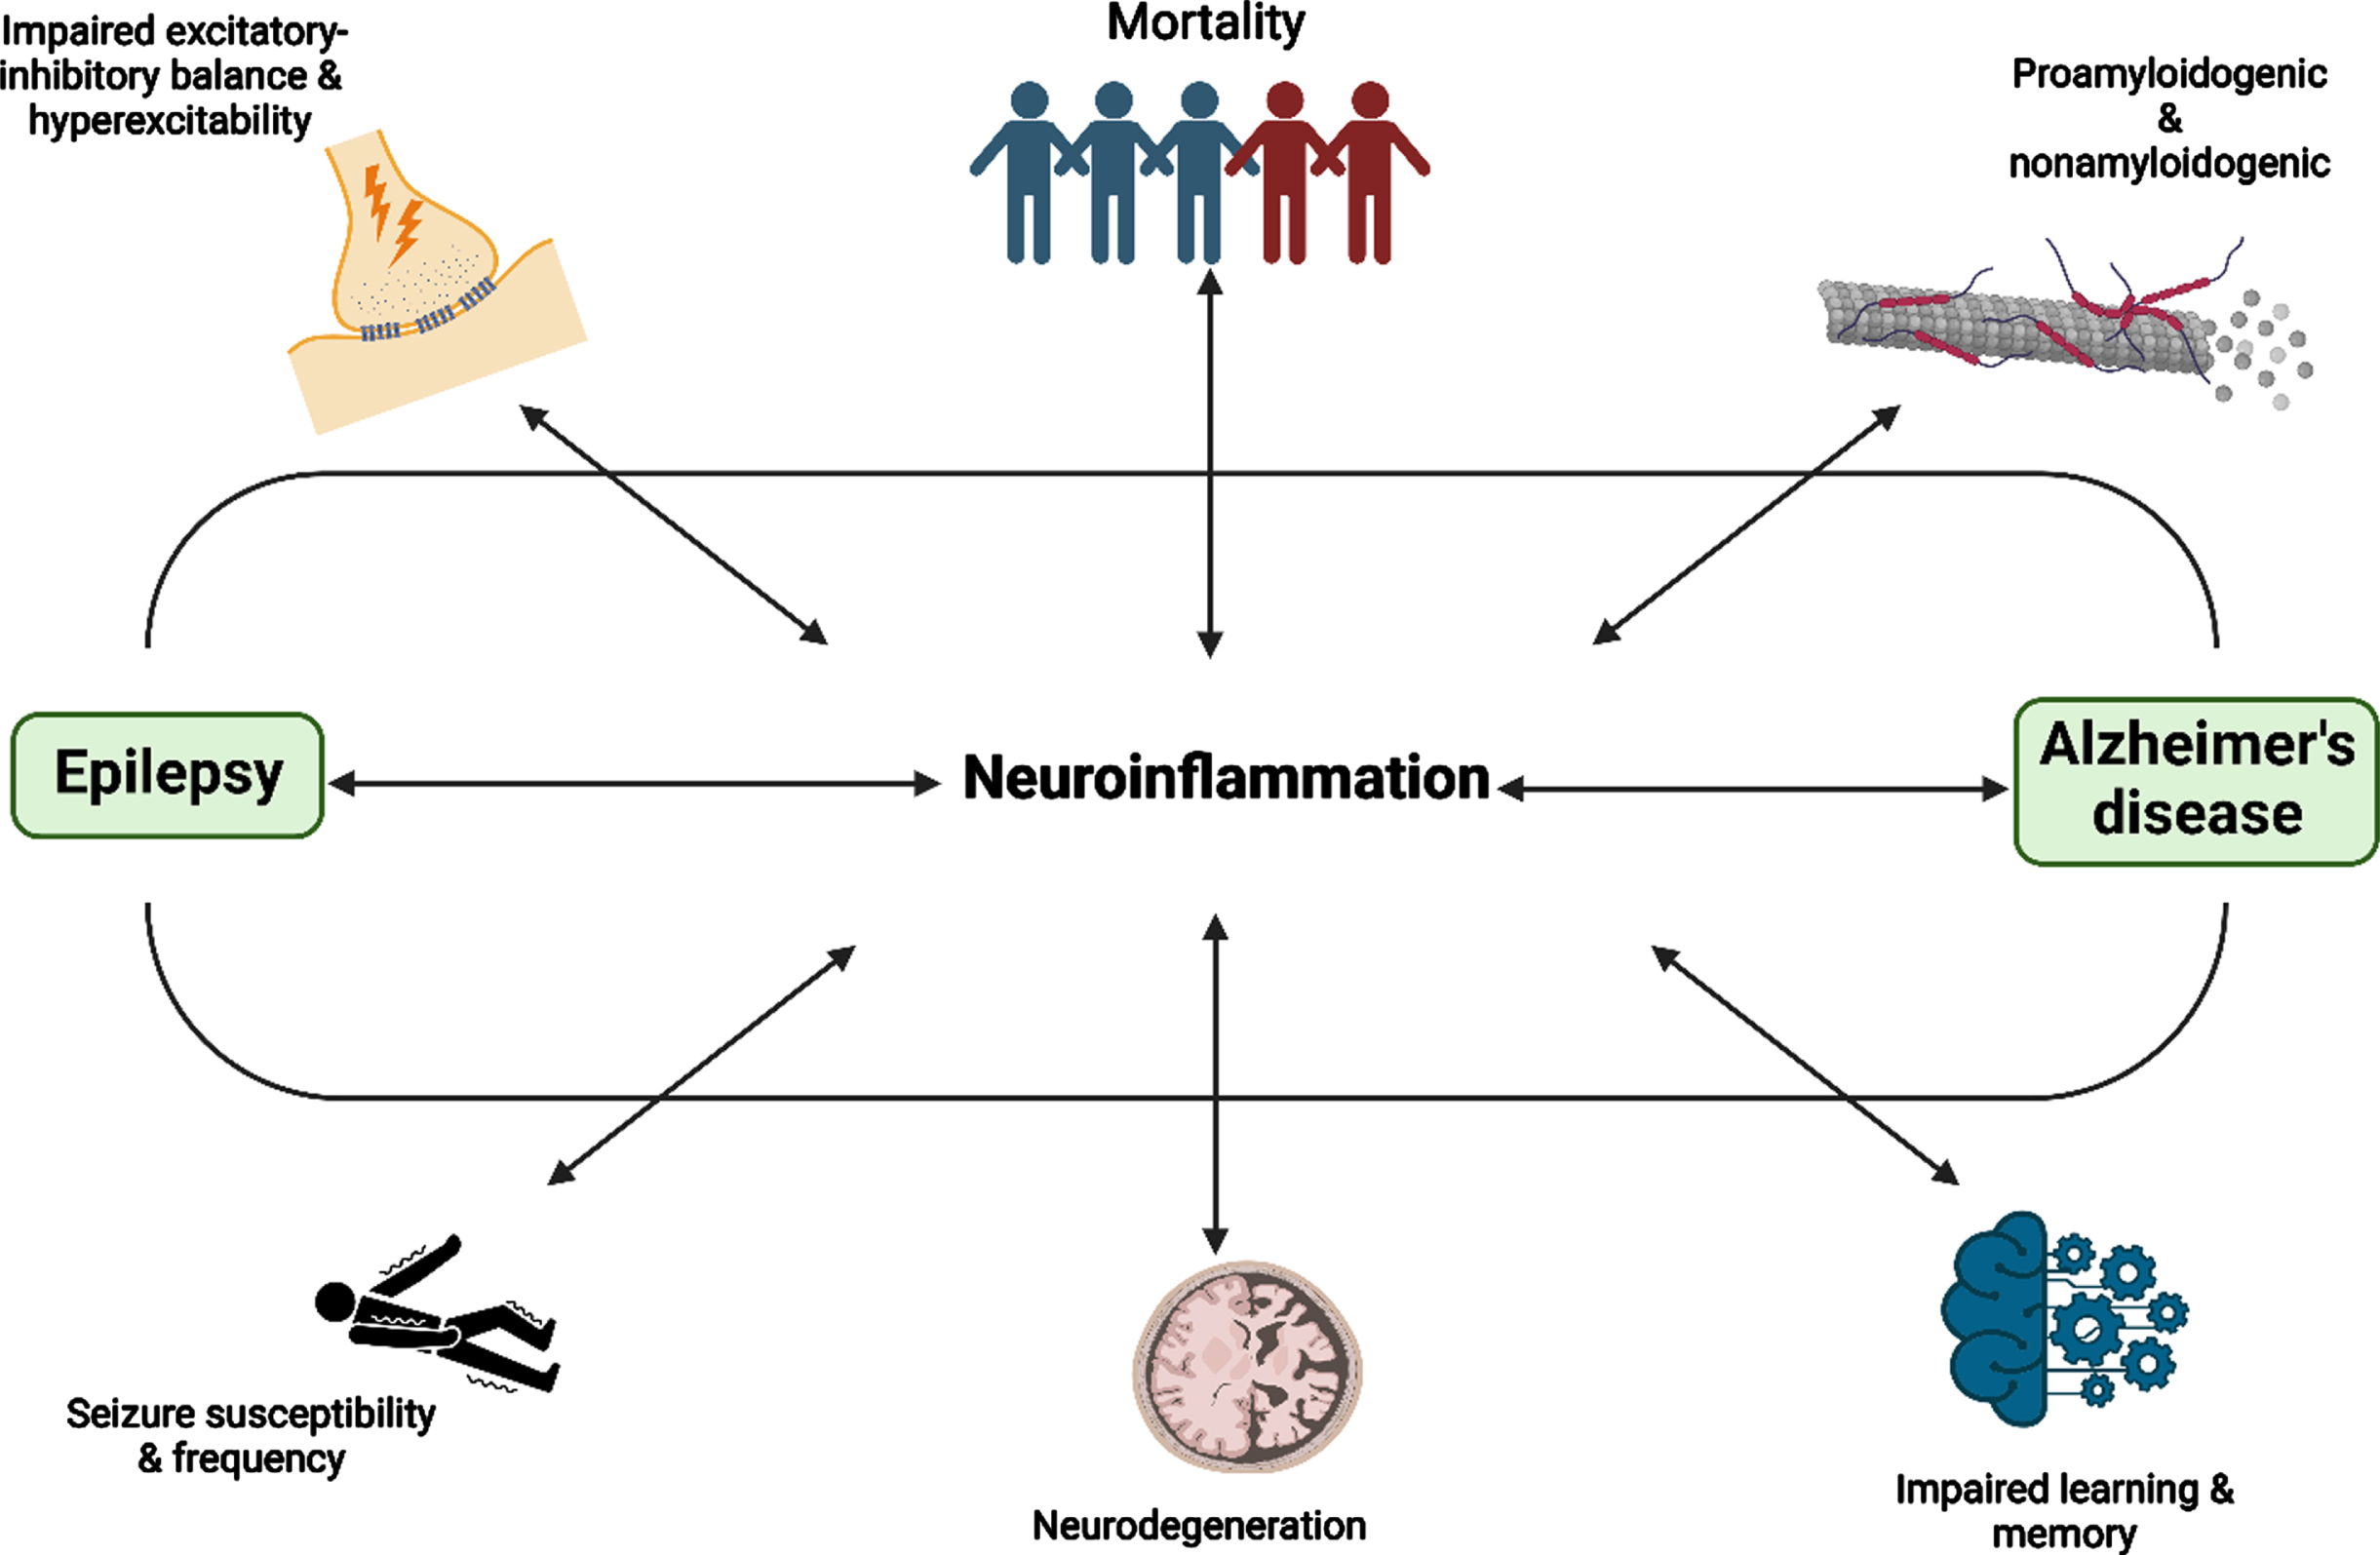 The association and consequences of neuroinflammation in AD and epilepsy. Figure was created in BioRender.com